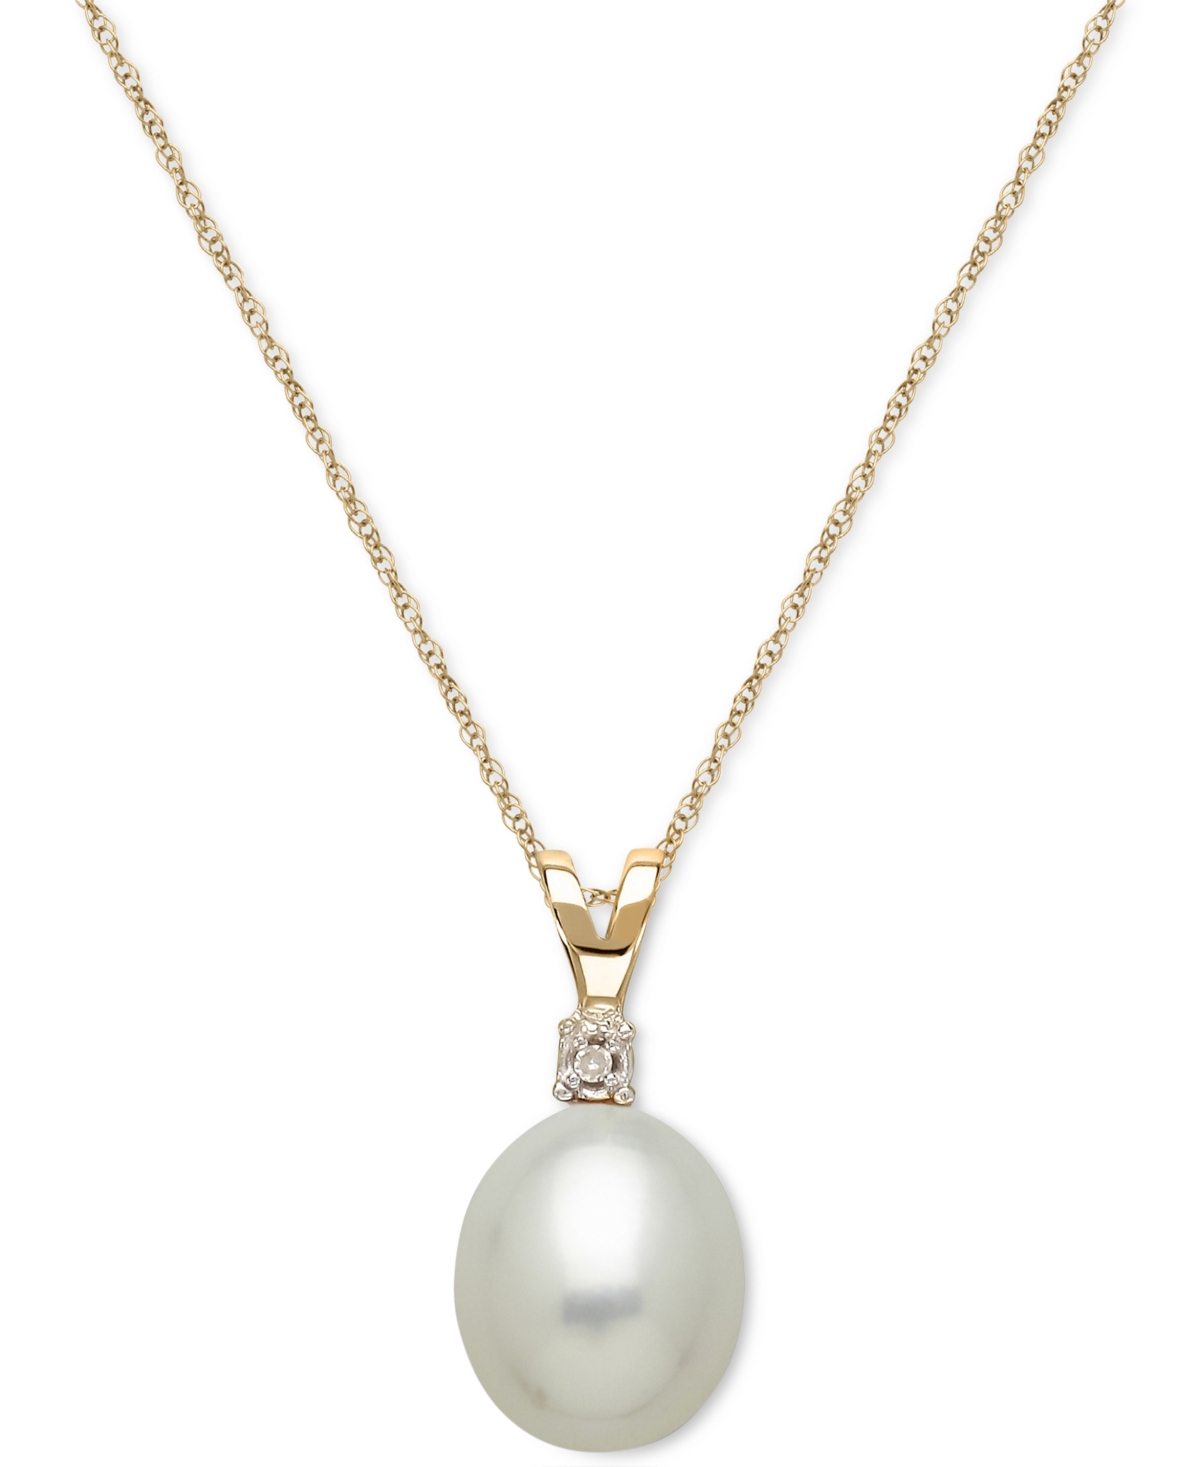 Cultured Freshwater Pearl (8mm) and Diamond Accent Pendant Necklace in 14k Gold - Gold